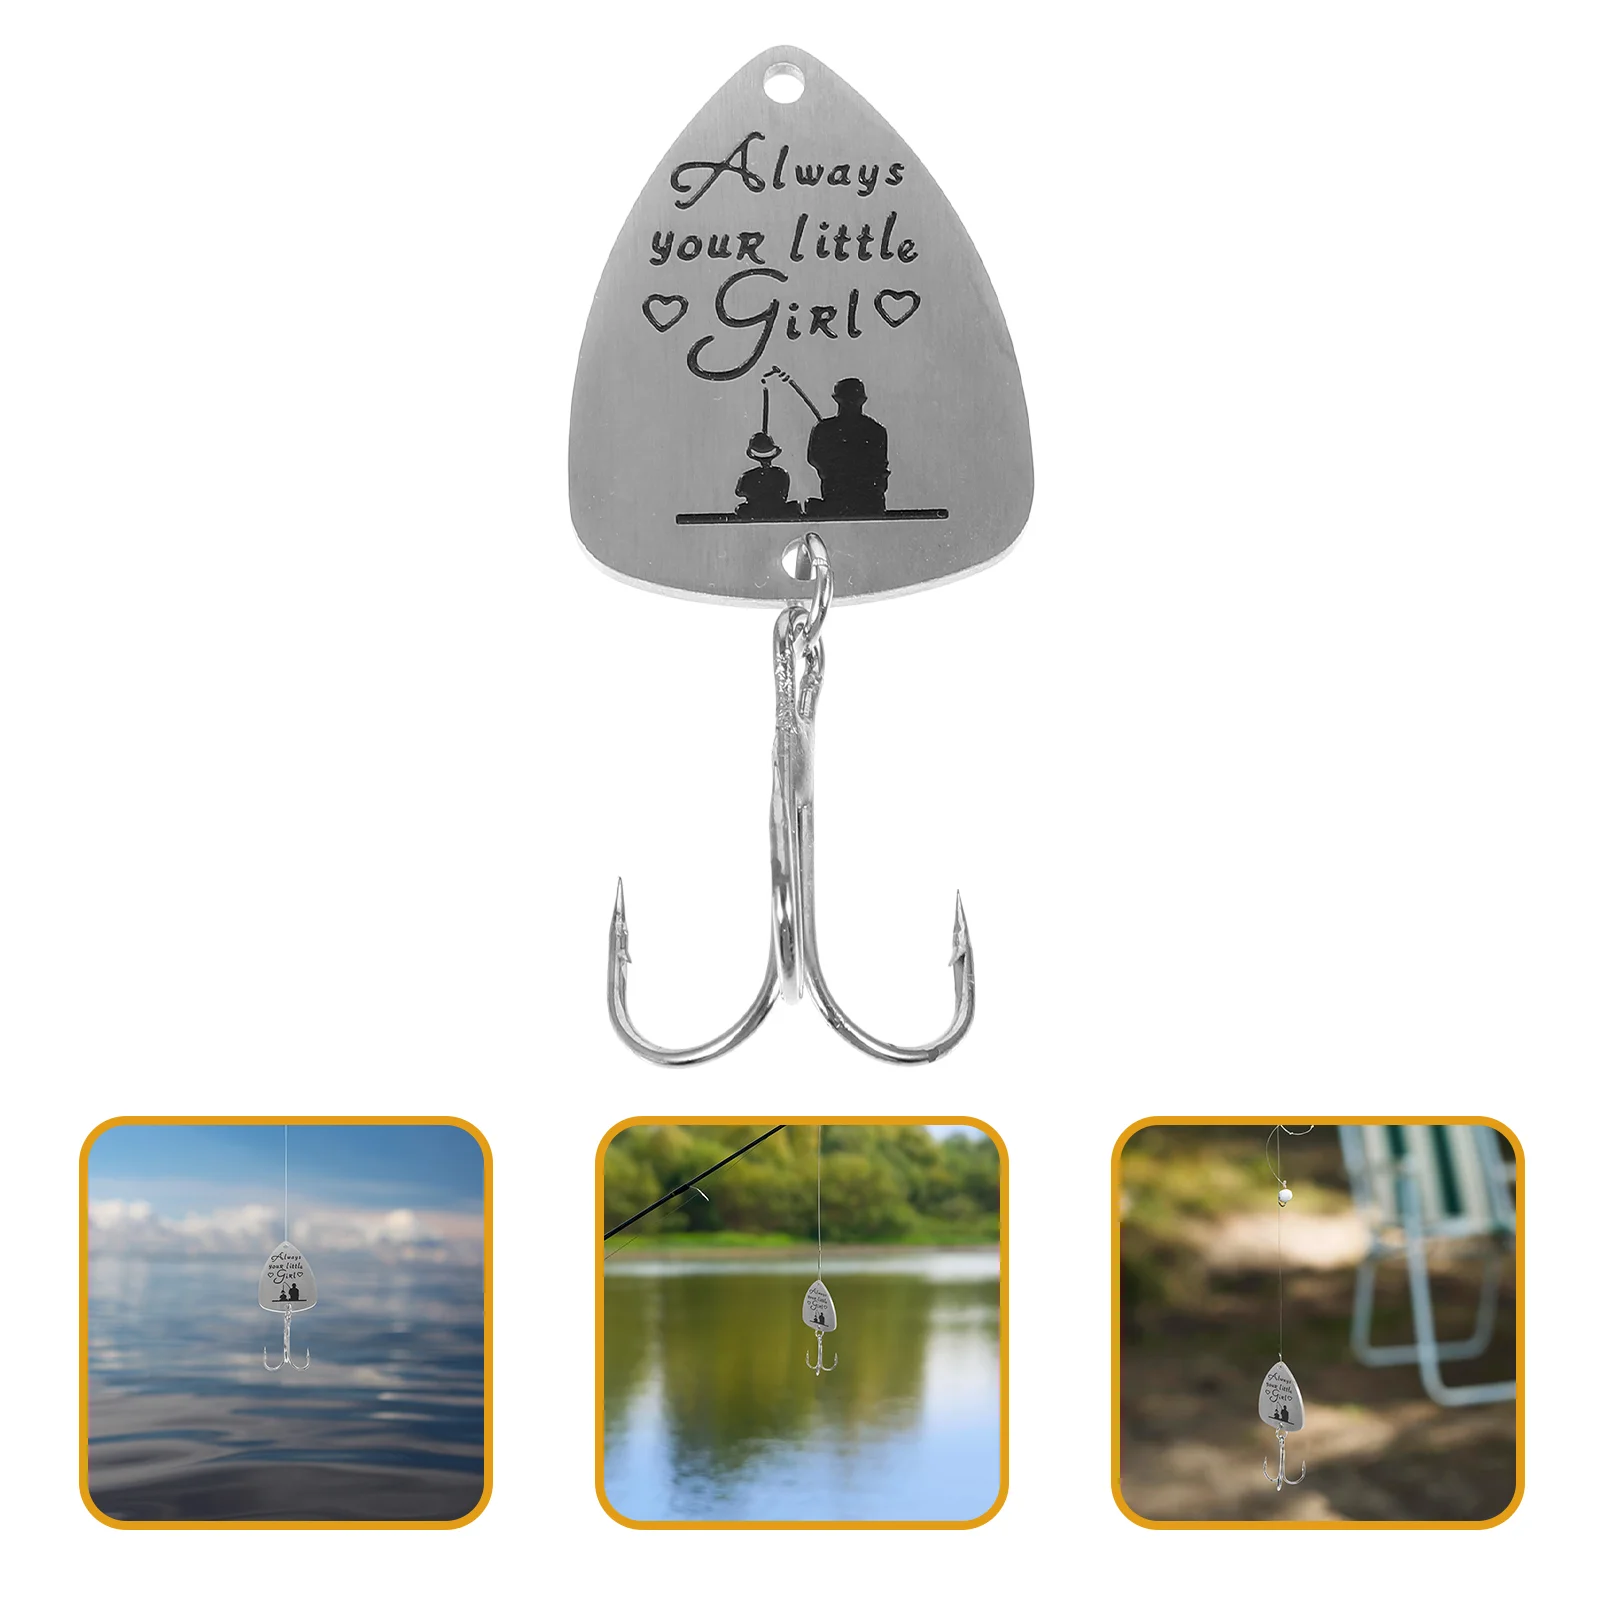 

Guitar Chip Fishhook Space Savers Hanging Gift Space-saving Convenient Fishing Gear Titanium Steel Small